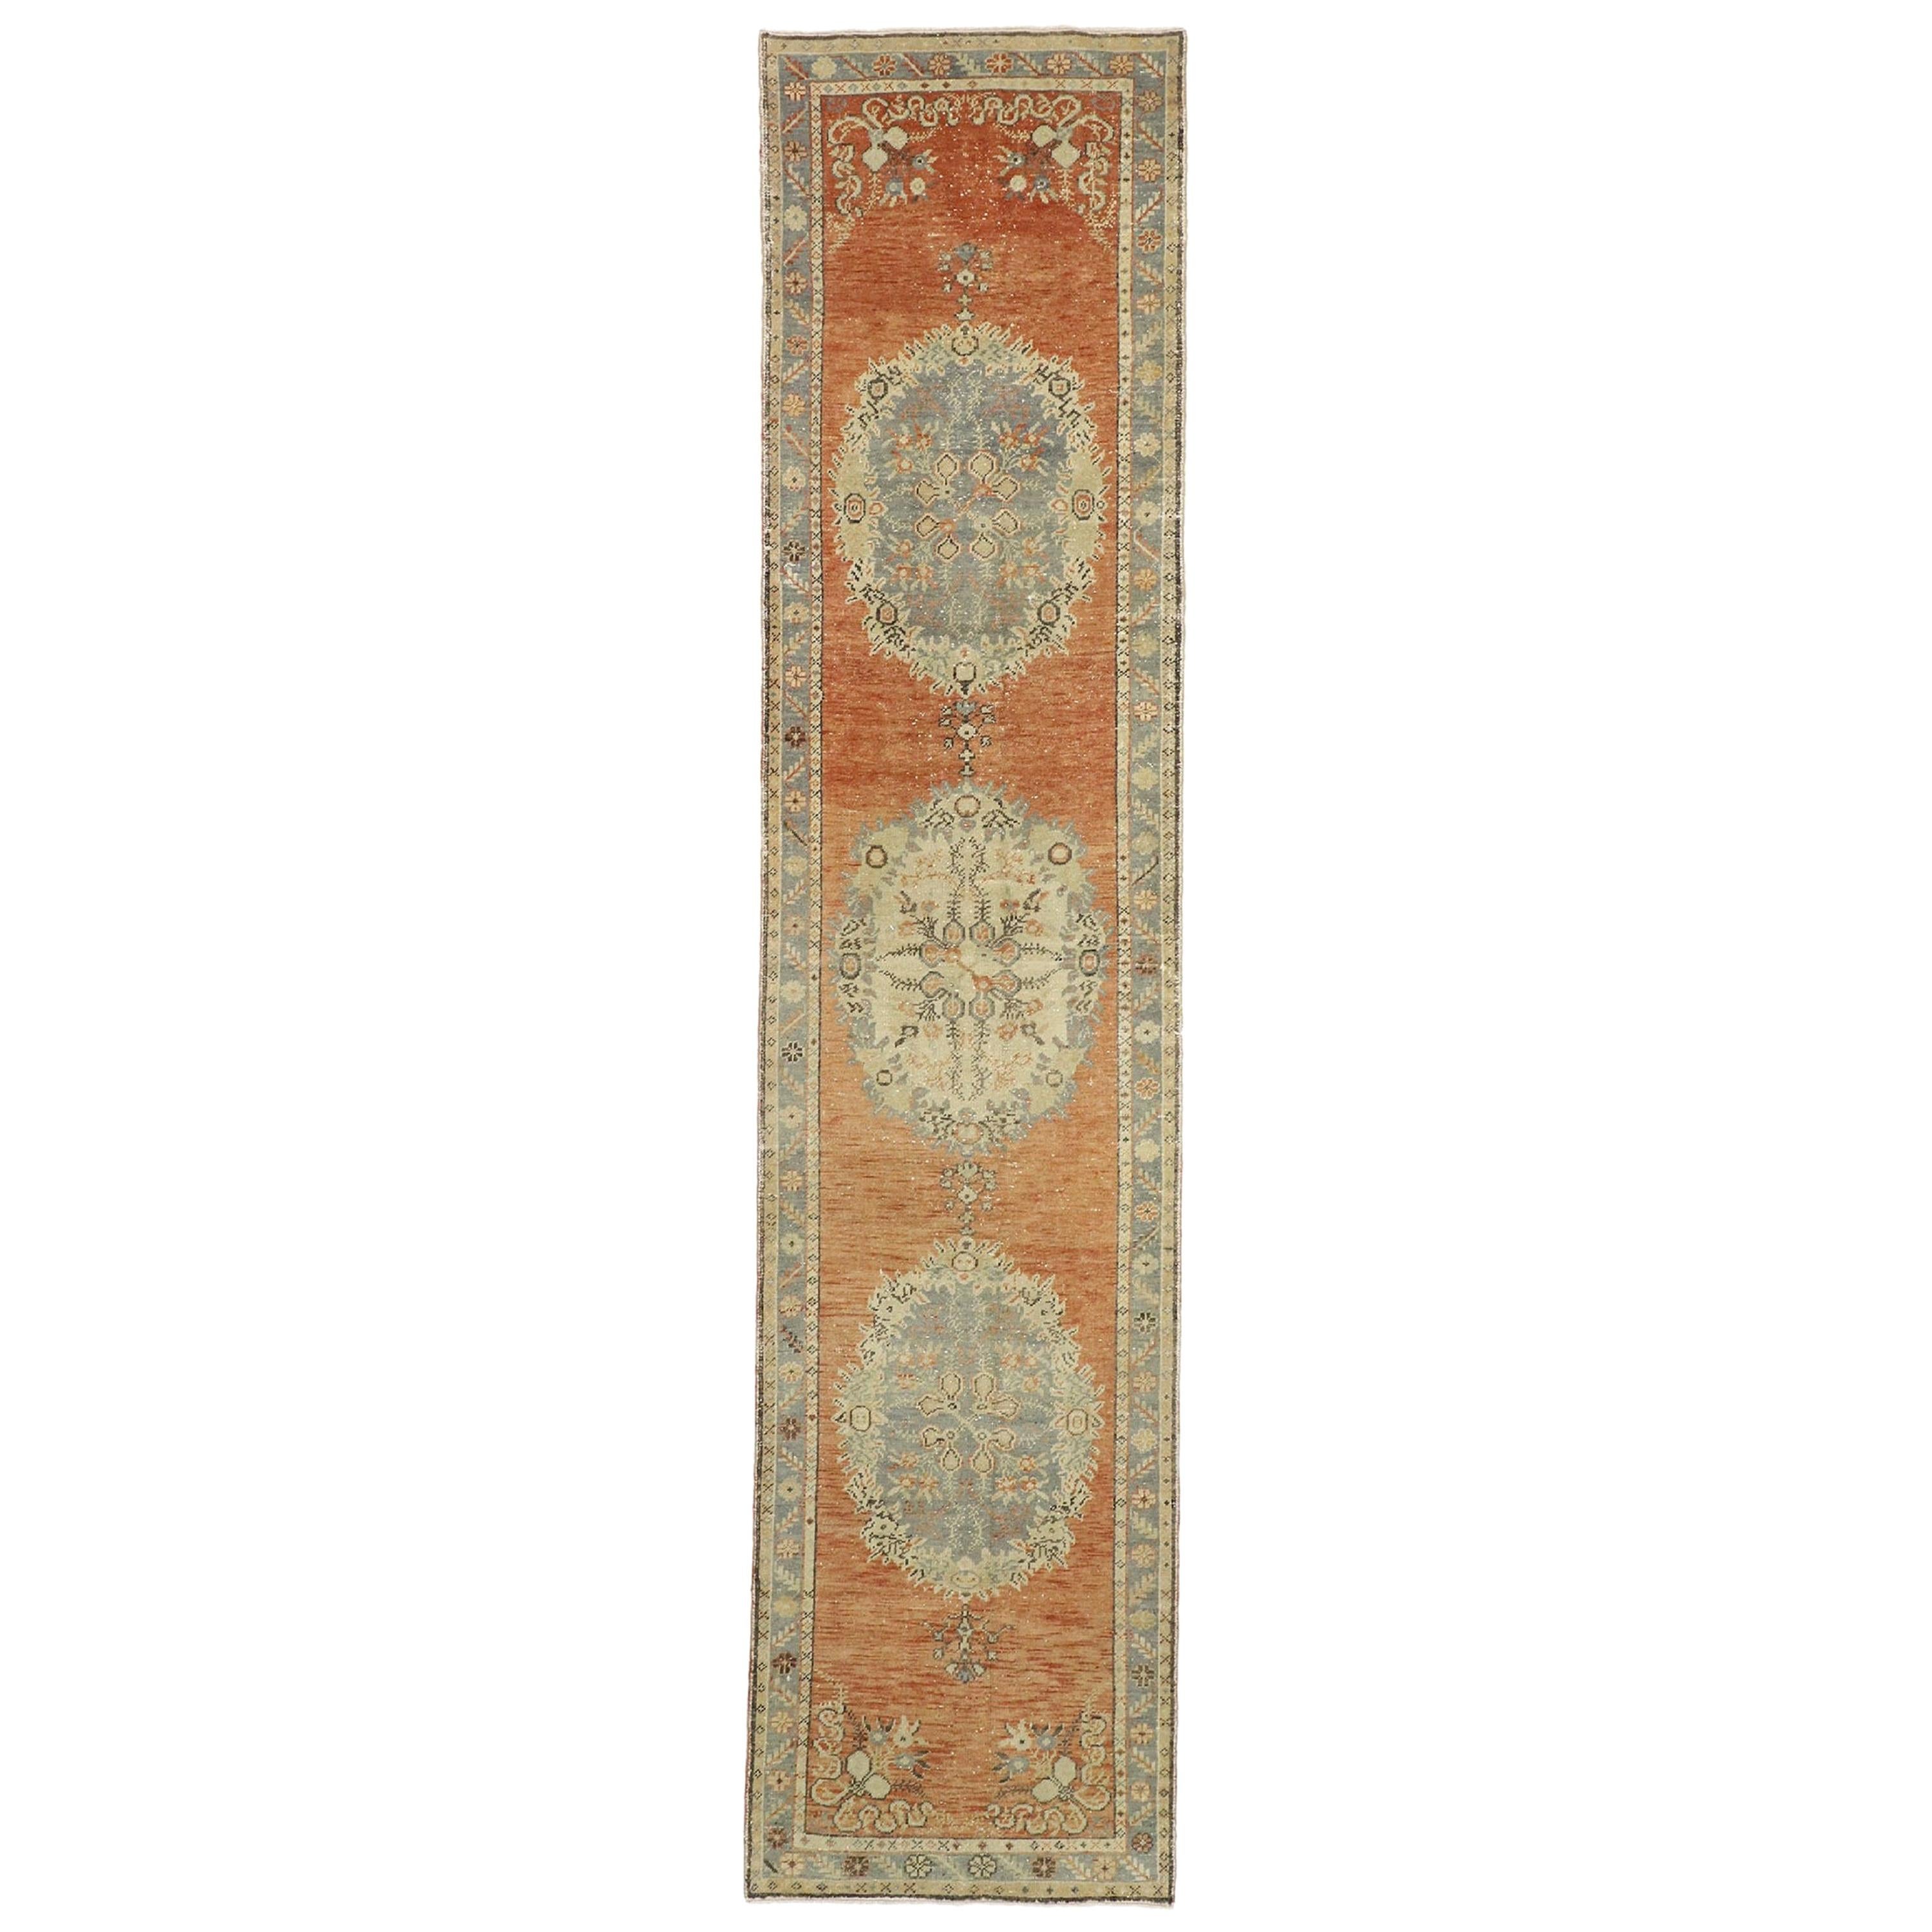 Distressed Vintage Turkish Oushak Runner with Romantic French Country Style